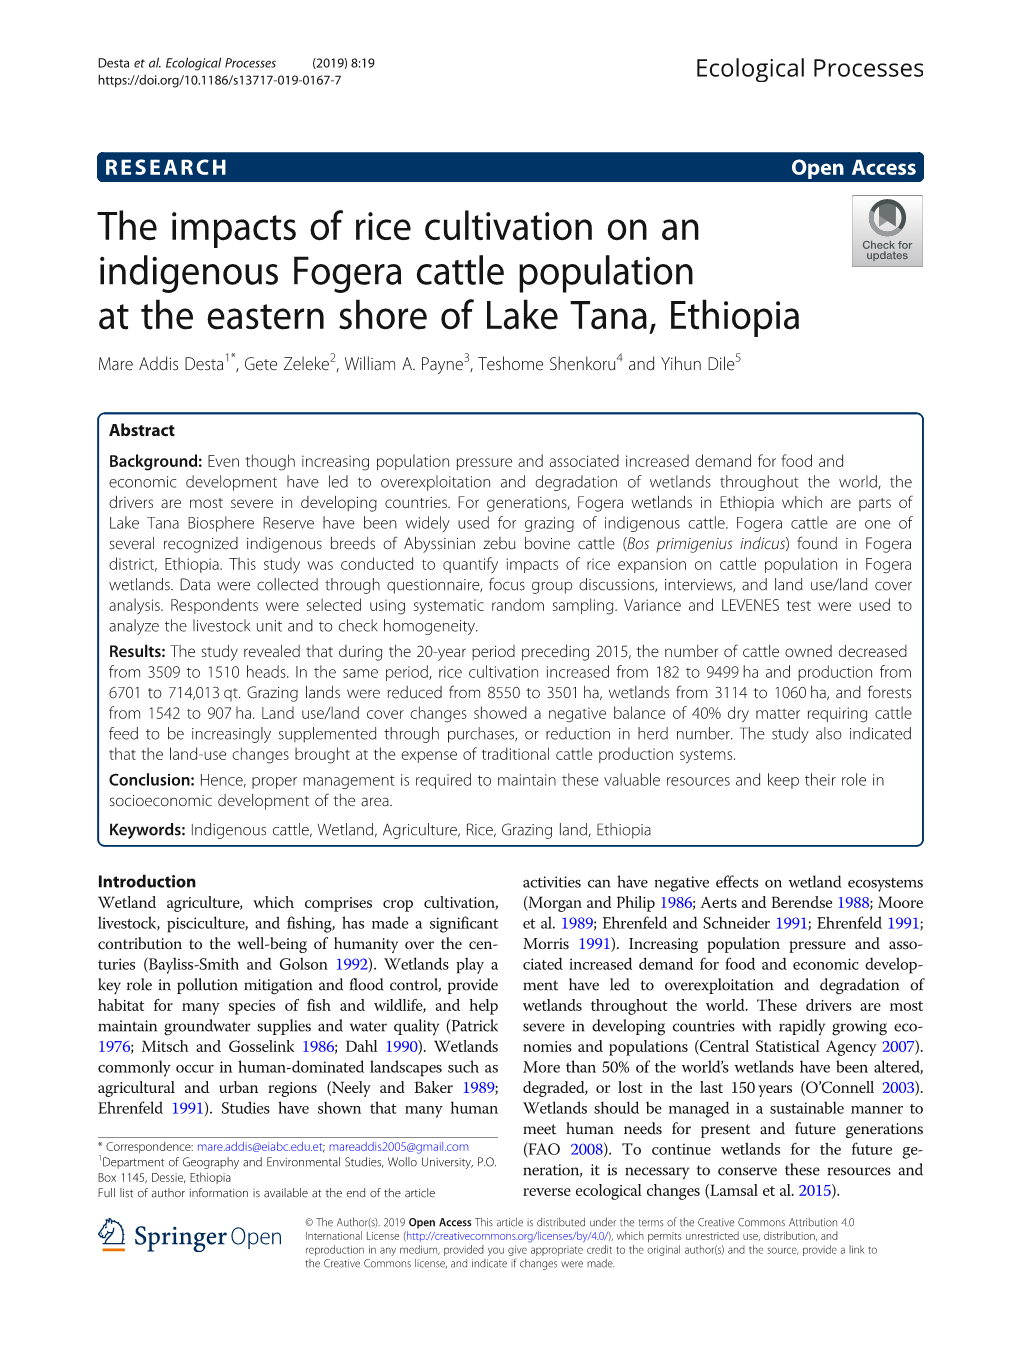 The Impacts of Rice Cultivation on an Indigenous Fogera Cattle Population at the Eastern Shore of Lake Tana, Ethiopia Mare Addis Desta1*, Gete Zeleke2, William A